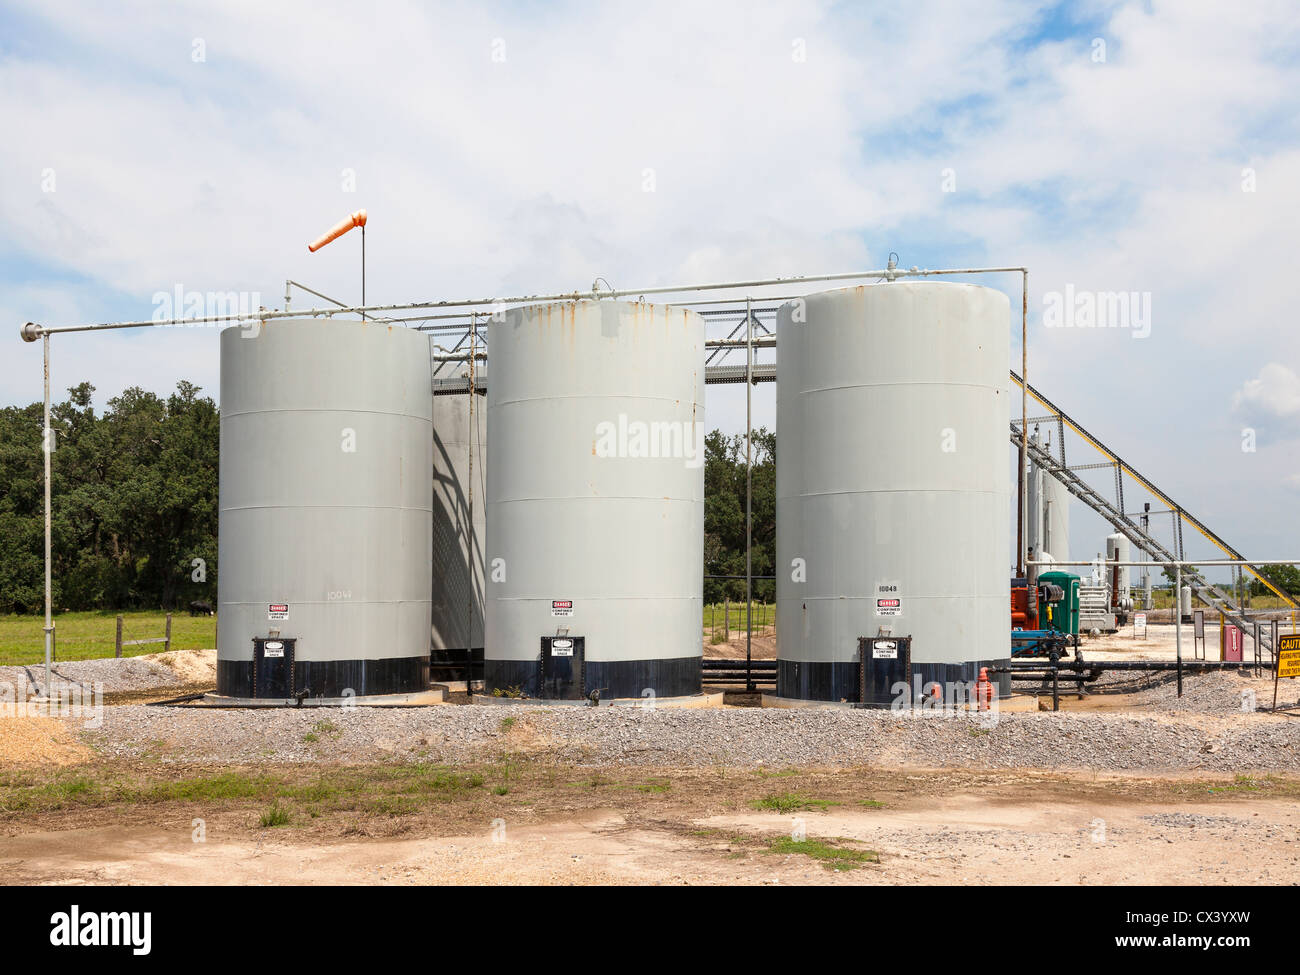 Oil storage tanks for holding crude oil to be loaded in tanker trucks at a remote crude oil well site Stock Photo